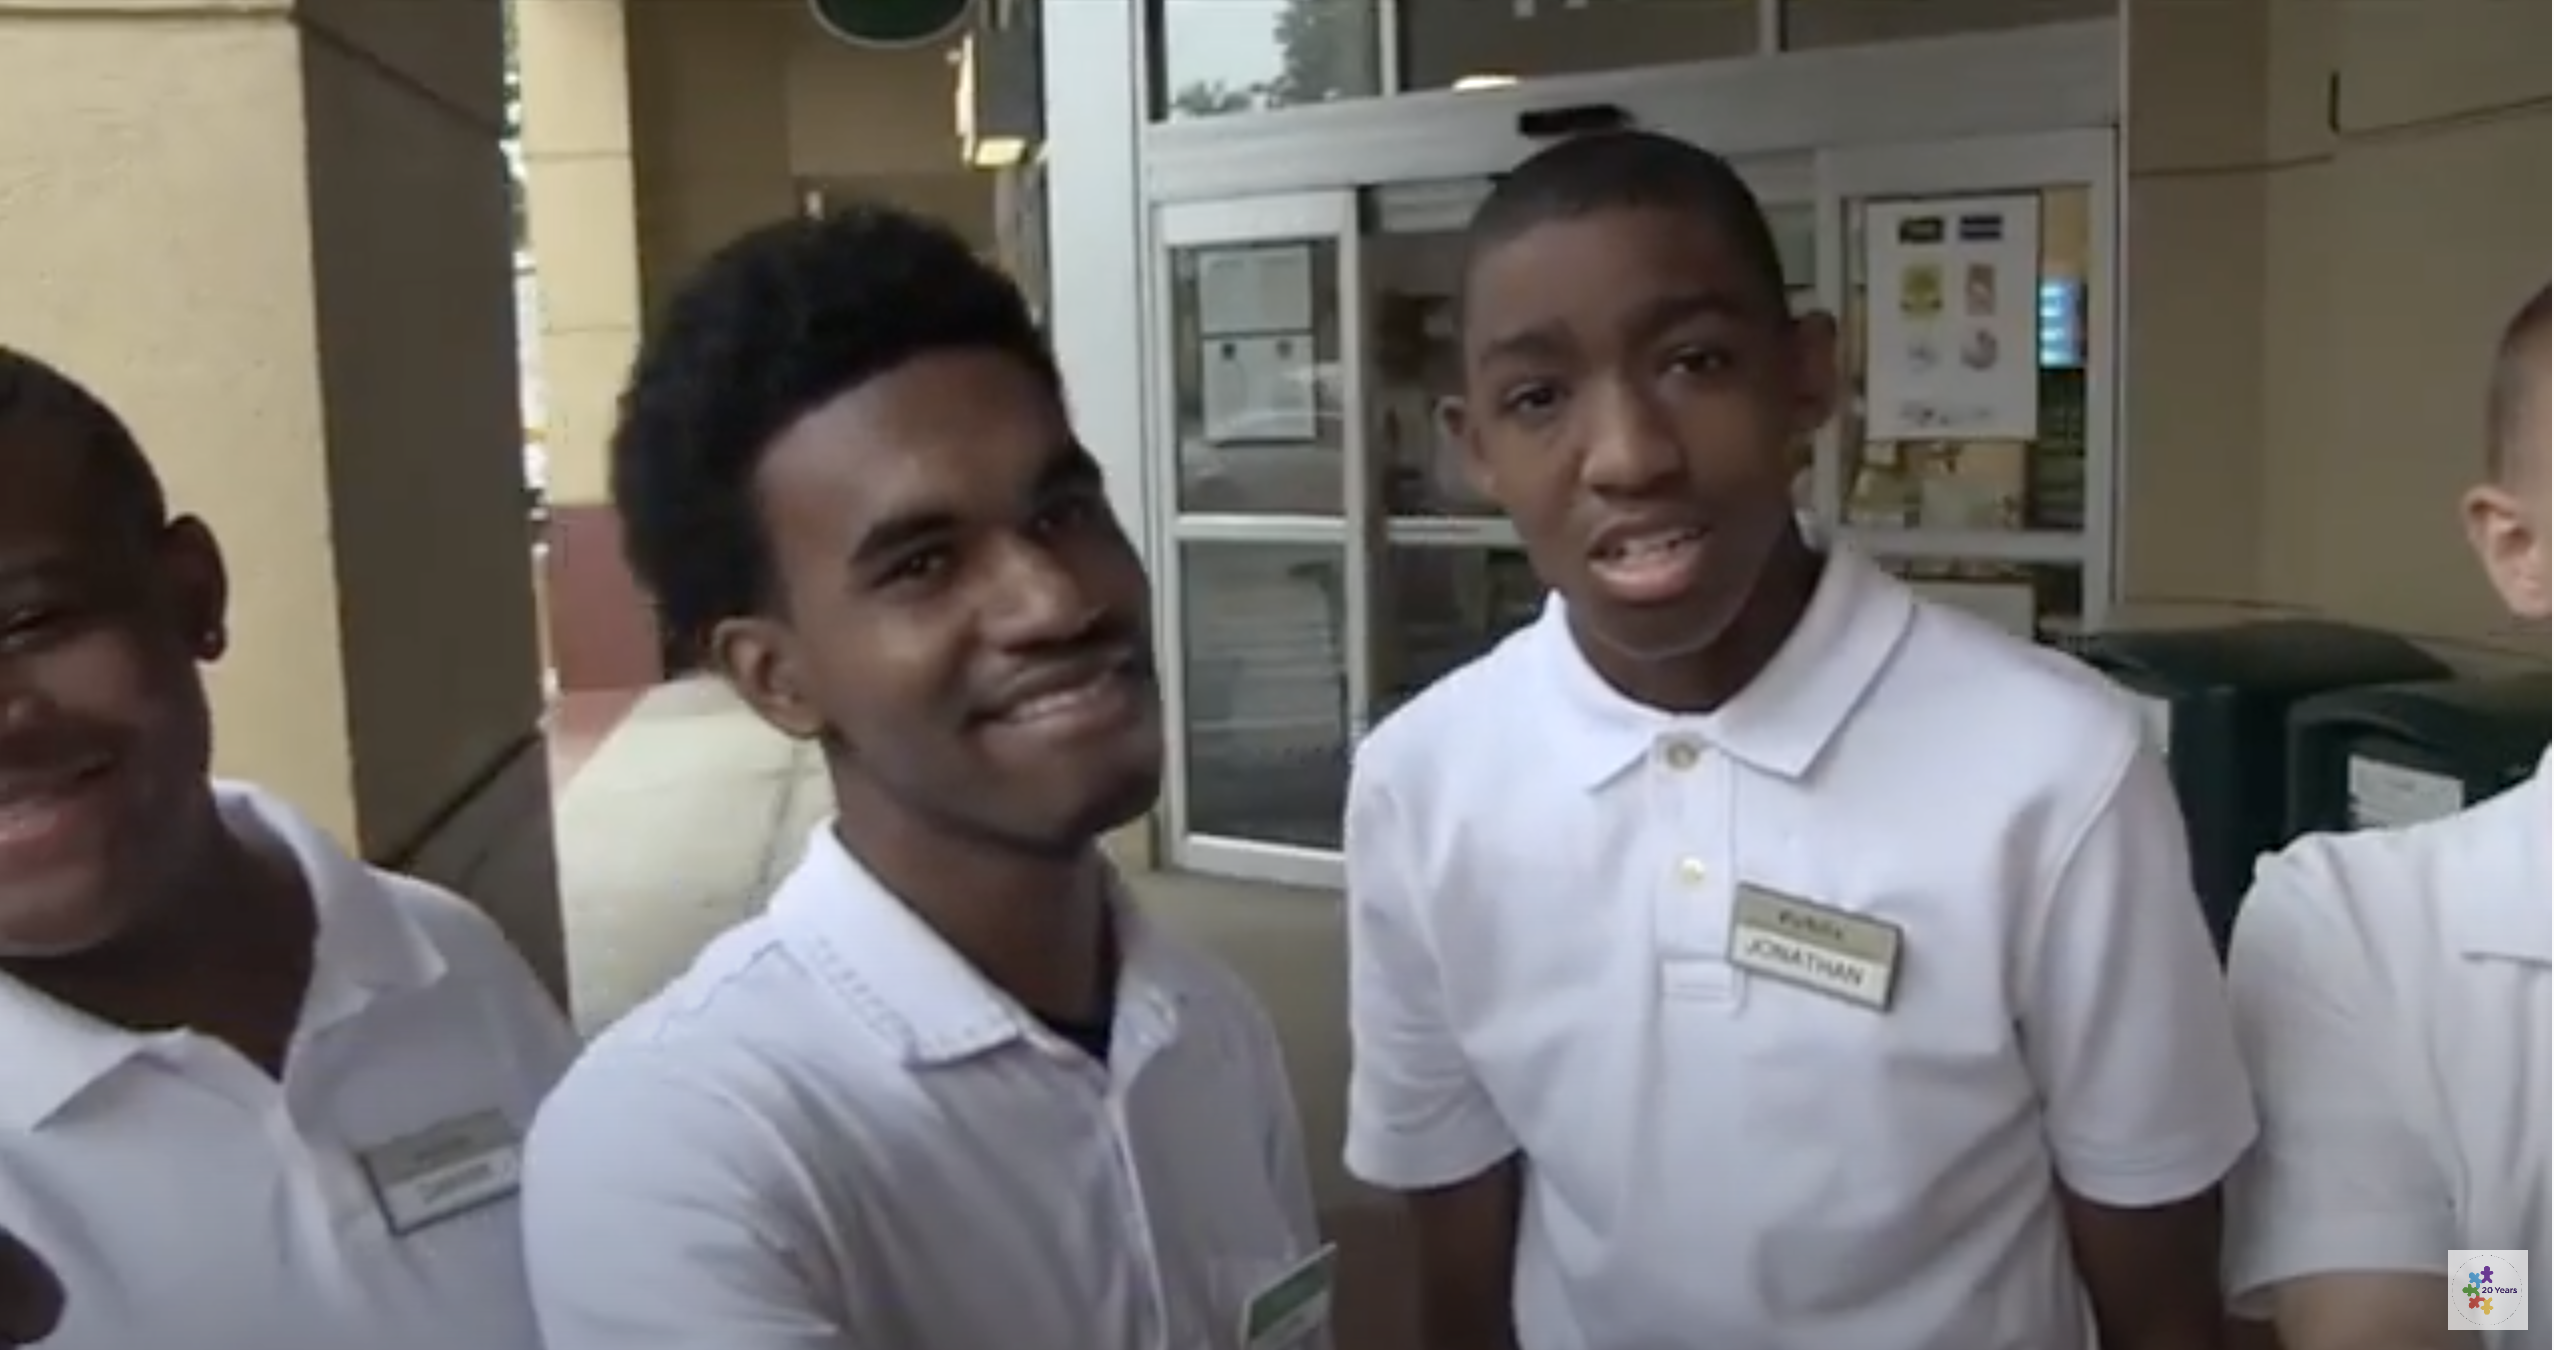 Two youth working at Publix.